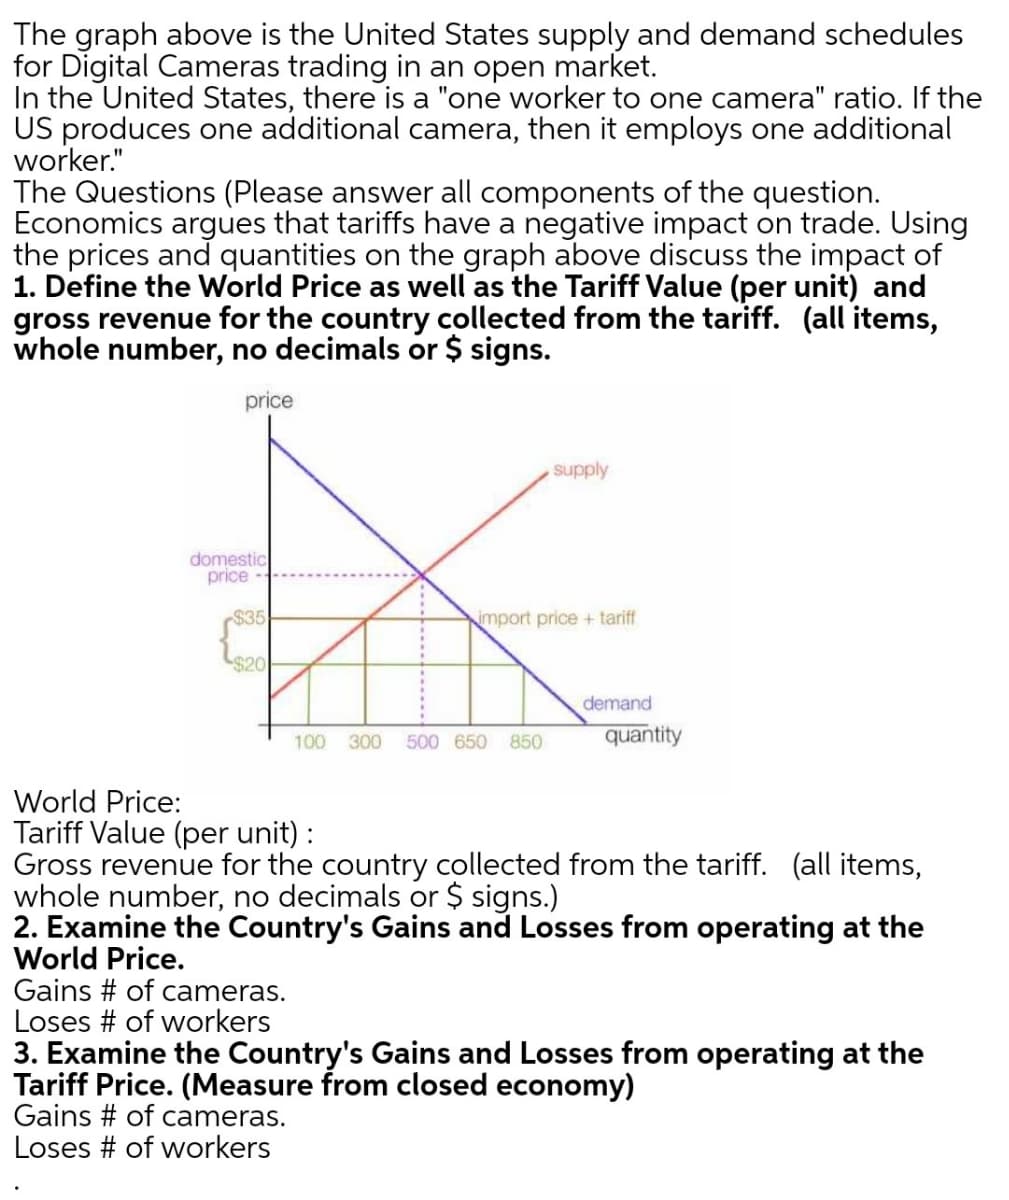 The graph above is the United States supply and demand schedules
for Digital Cameras trading in an open market.
In the United States, there is a "one worker to one camera" ratio. If the
US produces one additional camera, then it employs one additional
worker."
The Questions (Please answer all components of the question.
Economics argues that tariffs have a negative impact on trade. Using
the prices and quantities on the graph above discuss the impact of
1. Define the World Price as well as the Tariff Value (per unit) and
gross revenue for the country collected from the tariff. (all items,
whole number, no decimals or $ signs.
price
supply
domestic
price -
$35
import price + tariff
$20
demand
100
300
500 650 850
quantity
World Price:
Tariff Value (per unit) :
Gross revenue for the country collected from the tariff. (all items,
whole number, no decimals or $ signs.)
2. Examine the Country's Gains and Losses from operating at the
World Price.
Gains # of cameras.
Loses # of workers
3. Examine the Country's Gains and Losses from operating at the
Tariff Price. (Measure from closed economy)
Gains # of cameras.
Loses # of workers
